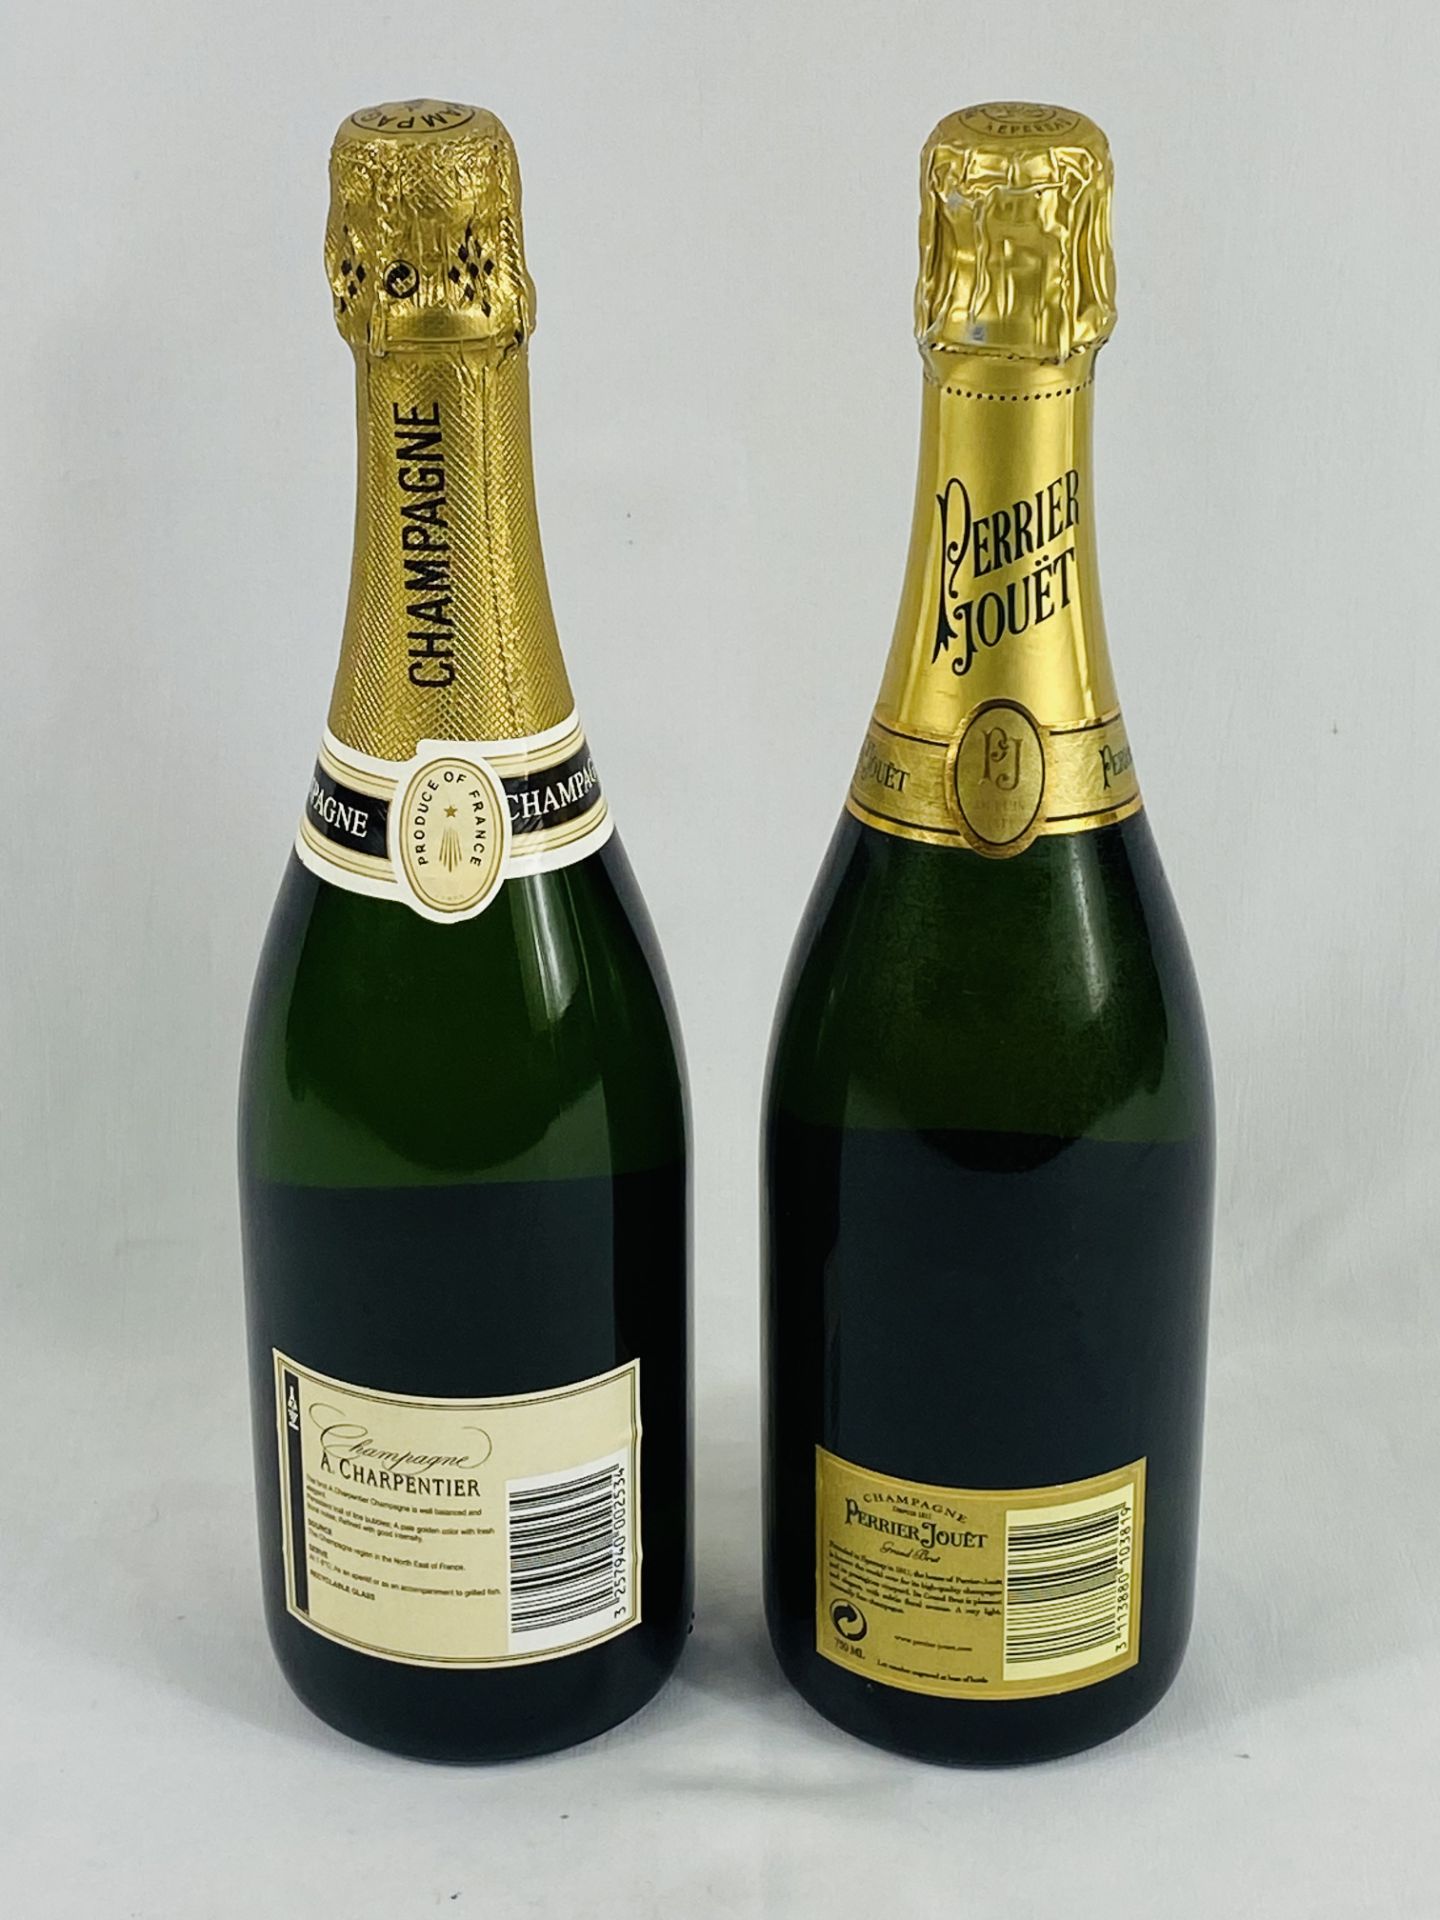 Bottle of Perrier Jouet Champagne; together with a bottle of Charpentier Tradition Brut. - Image 2 of 2